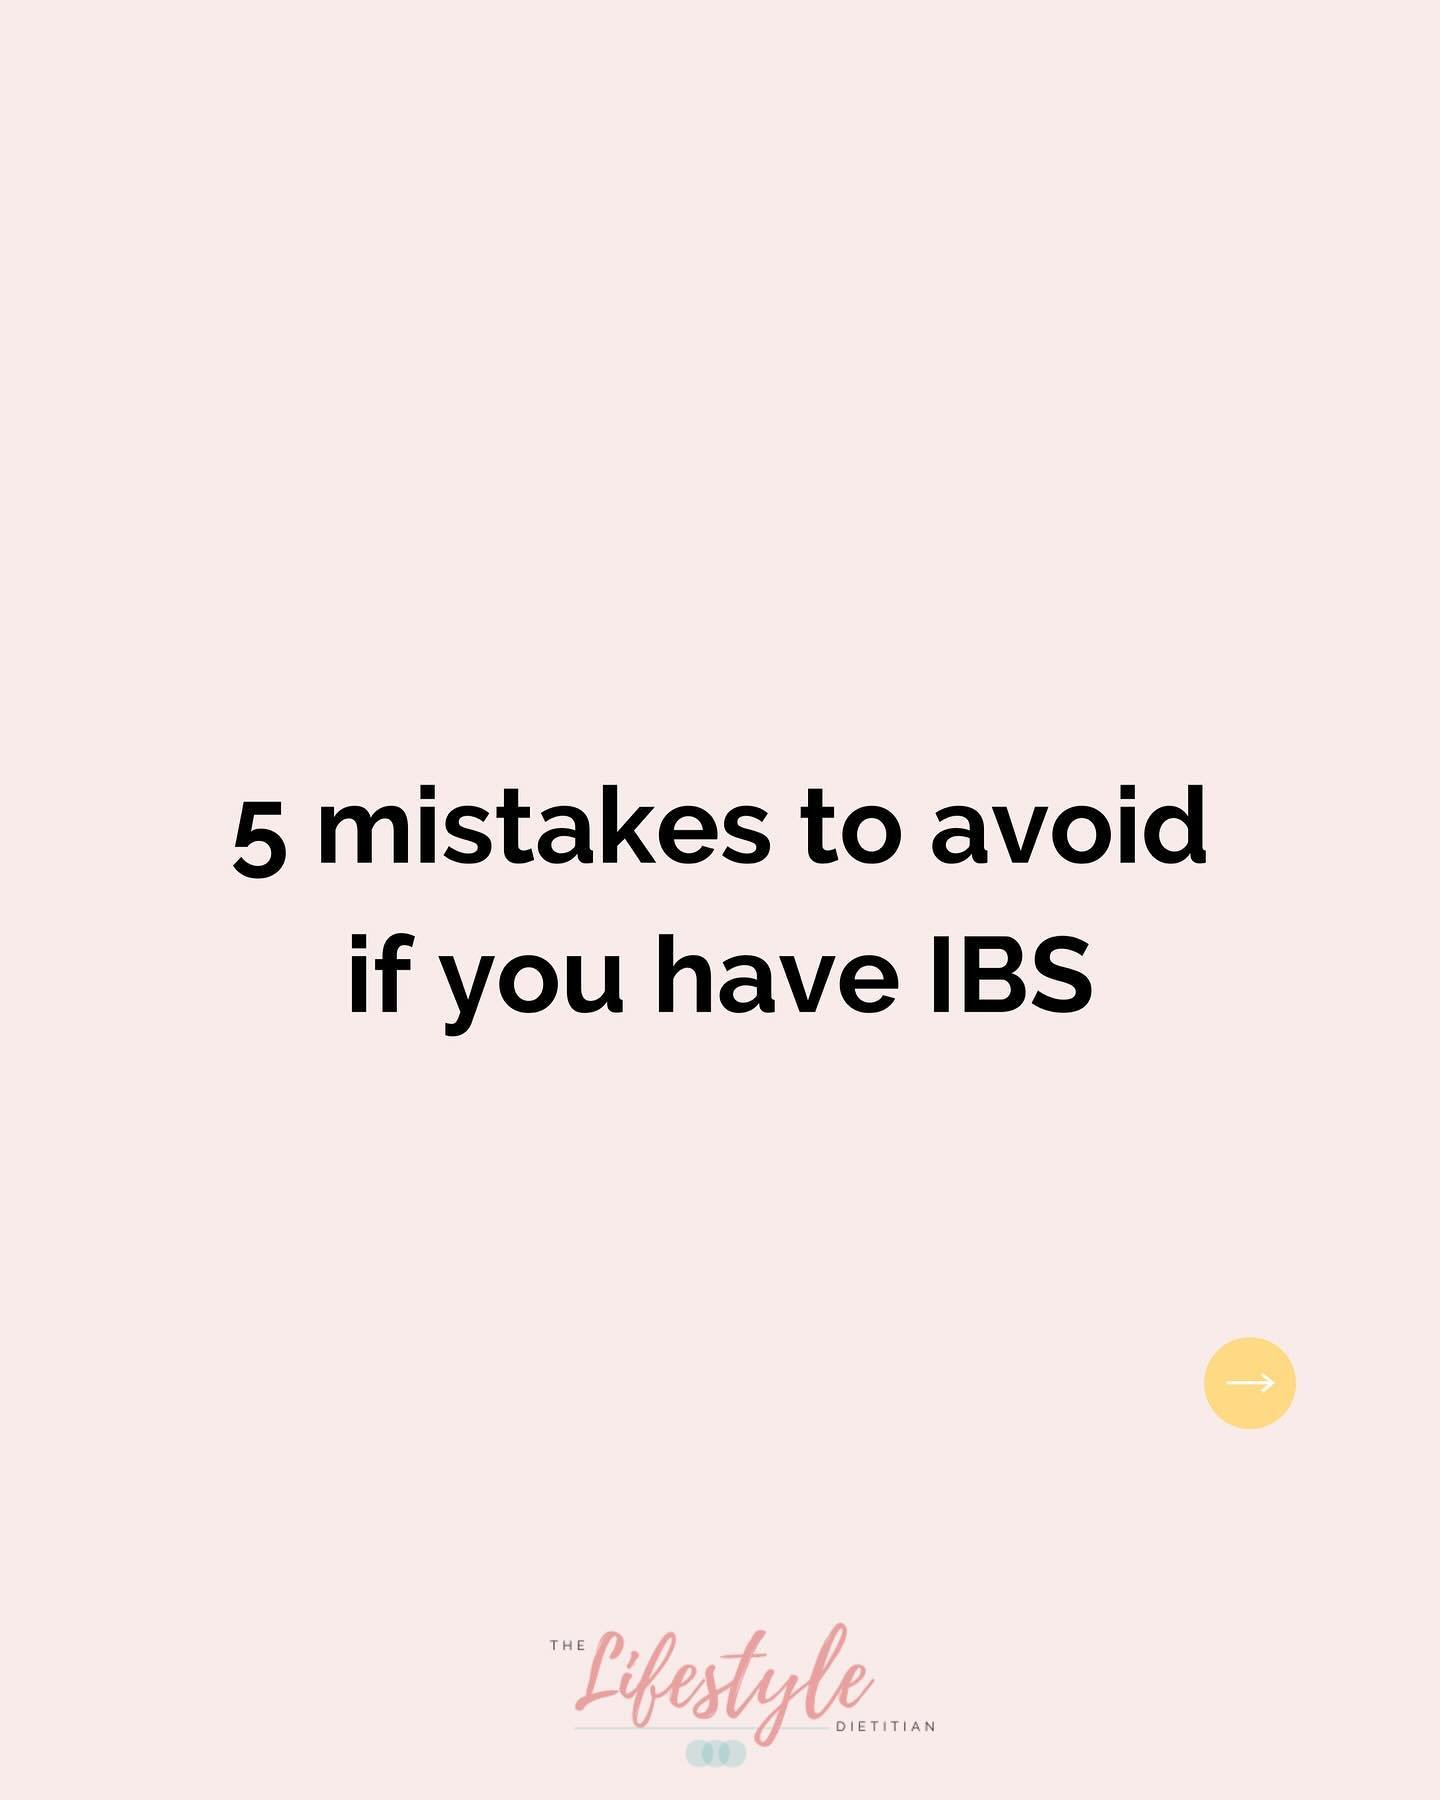 From our team to your feed: get IBS relief faster by skipping these mistakes 

Firstly, happy IBS Awarness Month!

Secondly, you really are not alone if you&rsquo;ve done any of these mistakes. These are the 5 most common ones we see when people stru